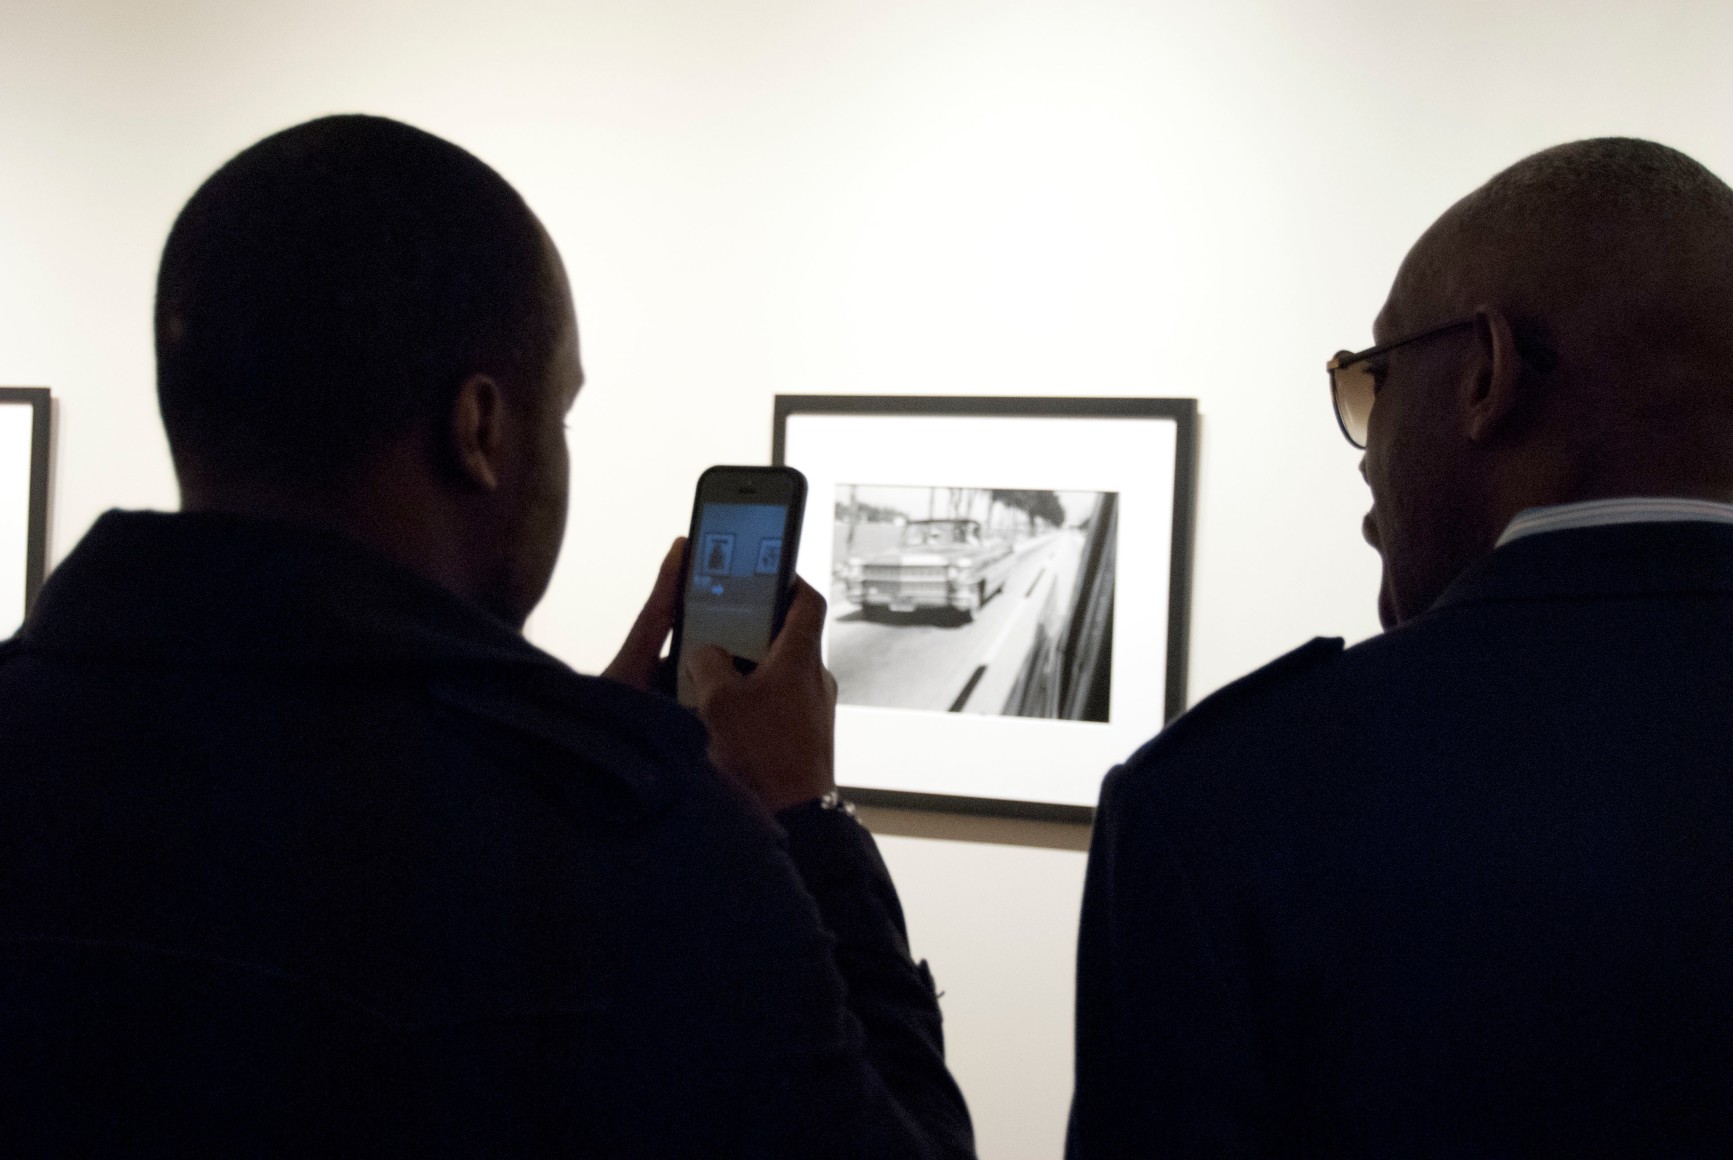 Preview / American Champion Gallery Exhibitions The Gordon Parks